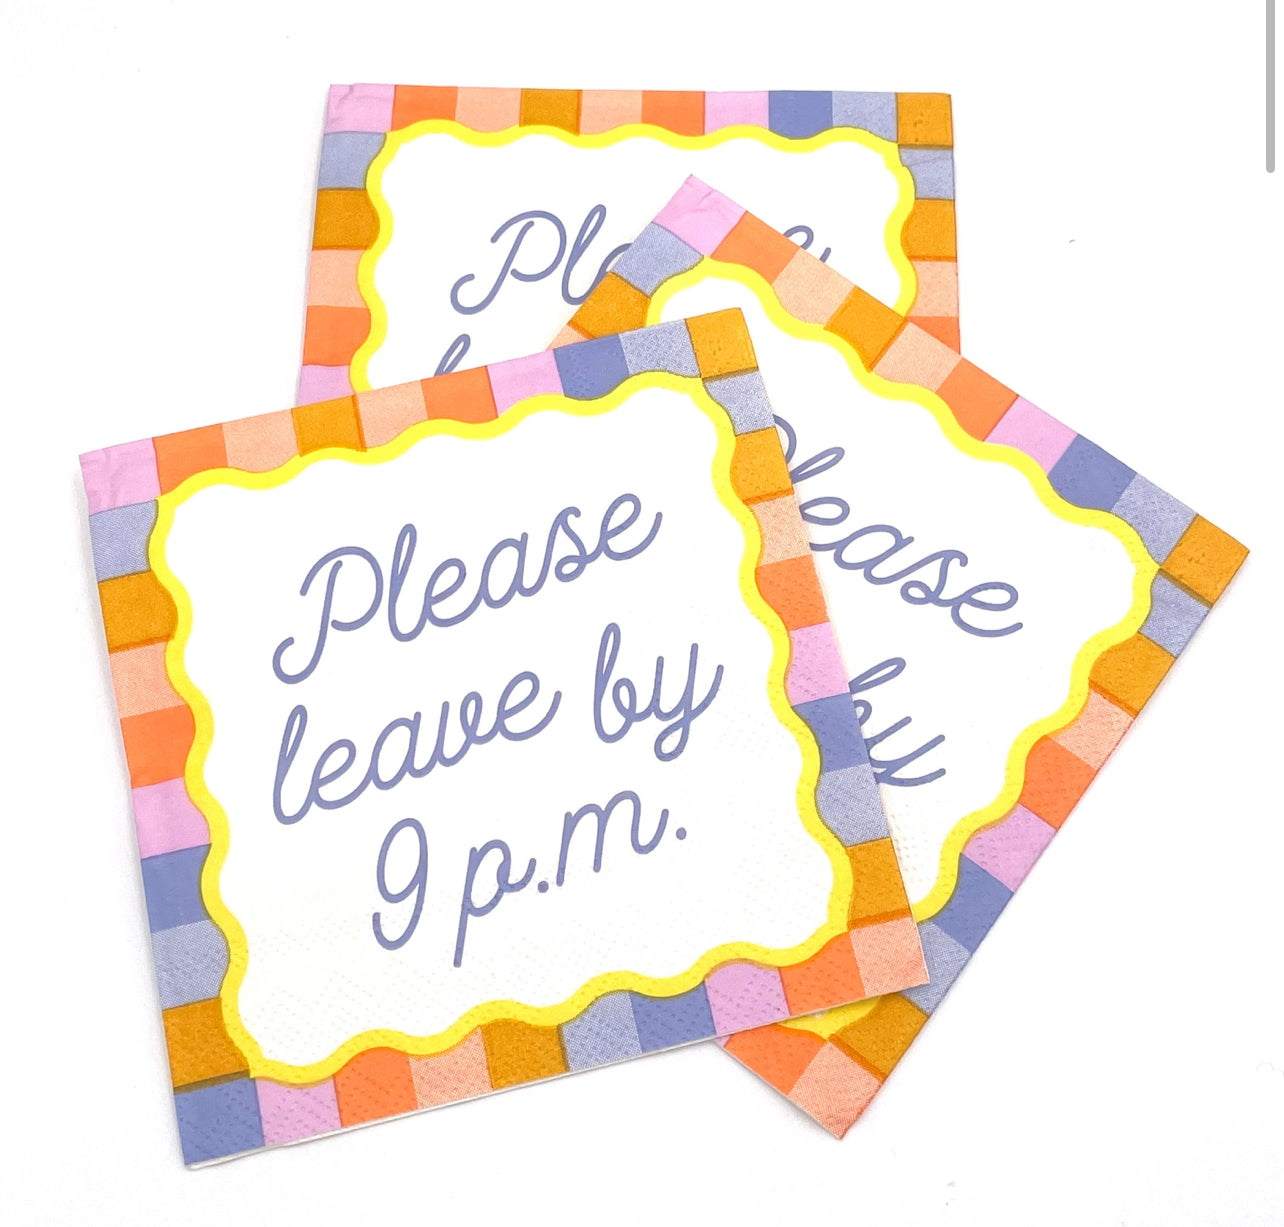 Please Leave By 9P.M. - Cocktail Napkins, Pack of 20